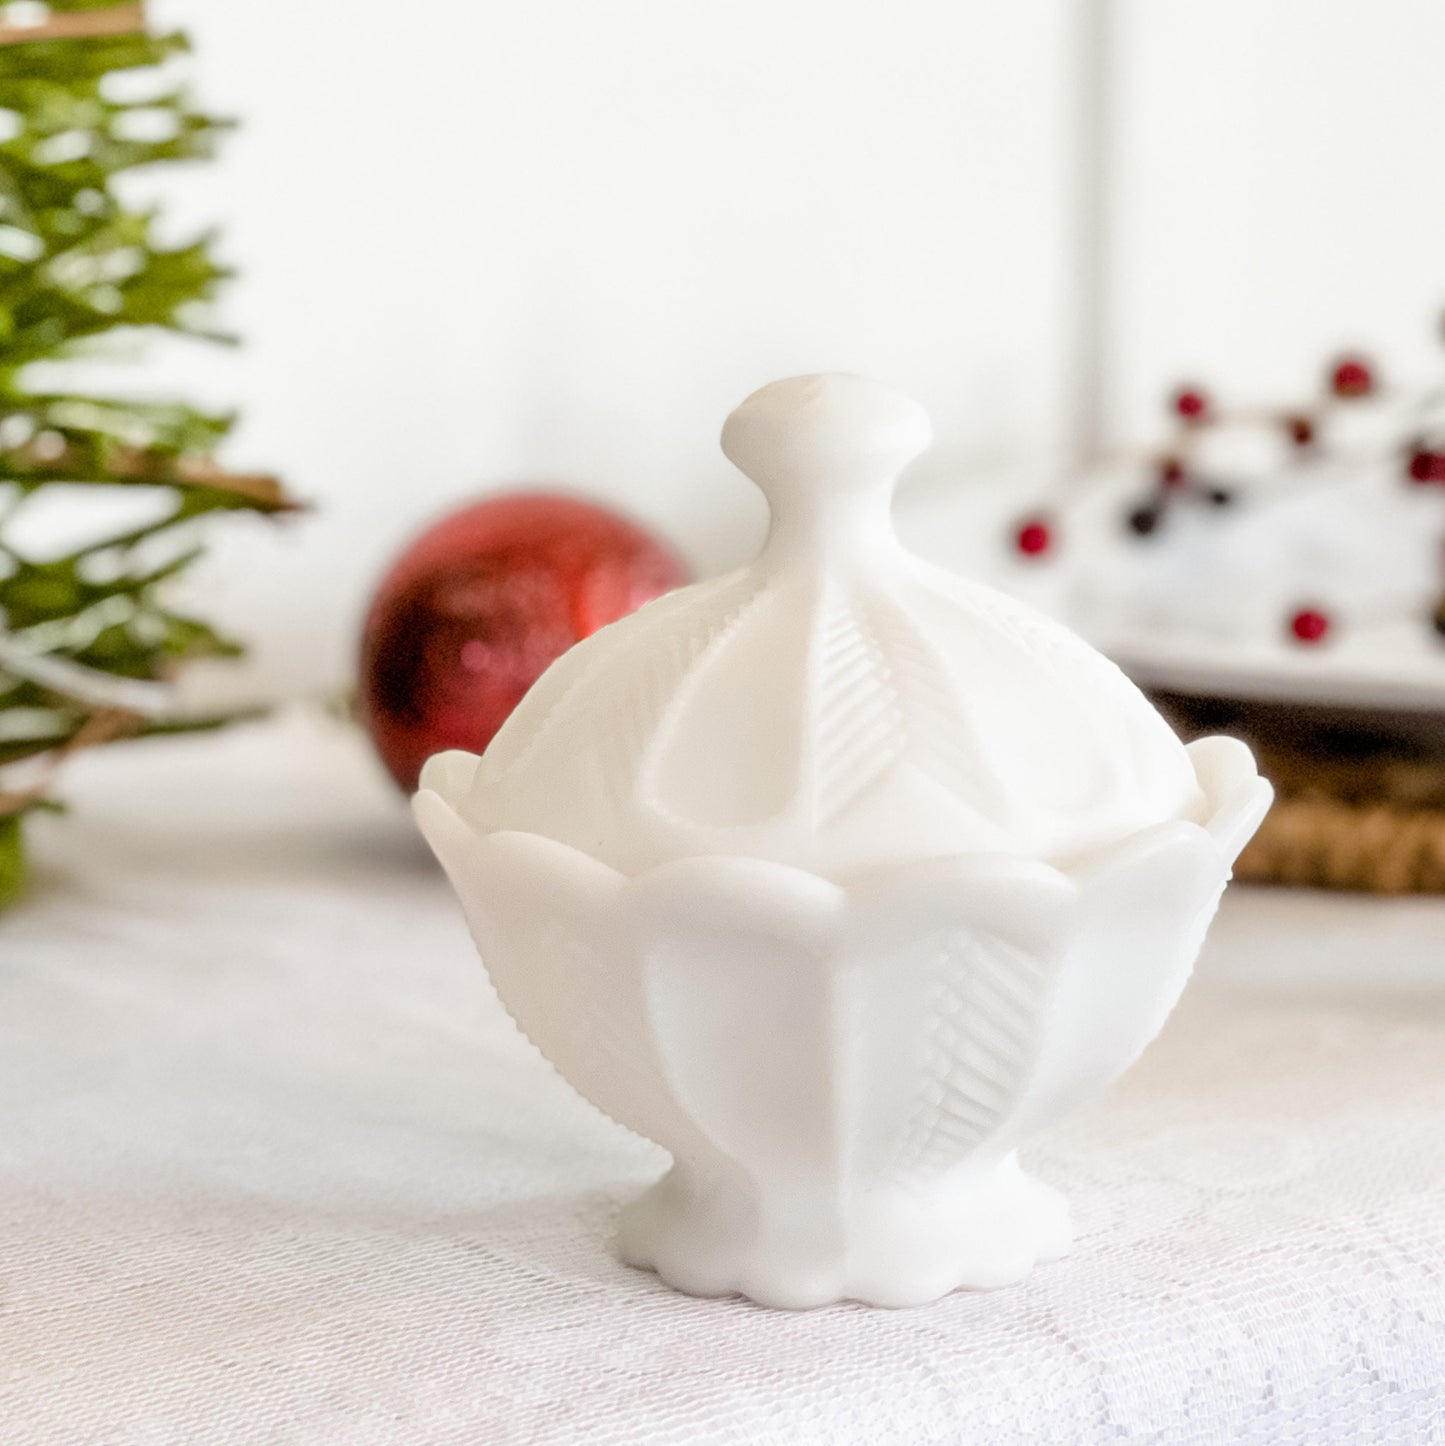 Scented Candles, Milk Glass, Best Friend Gifts, Farmhouse Decor